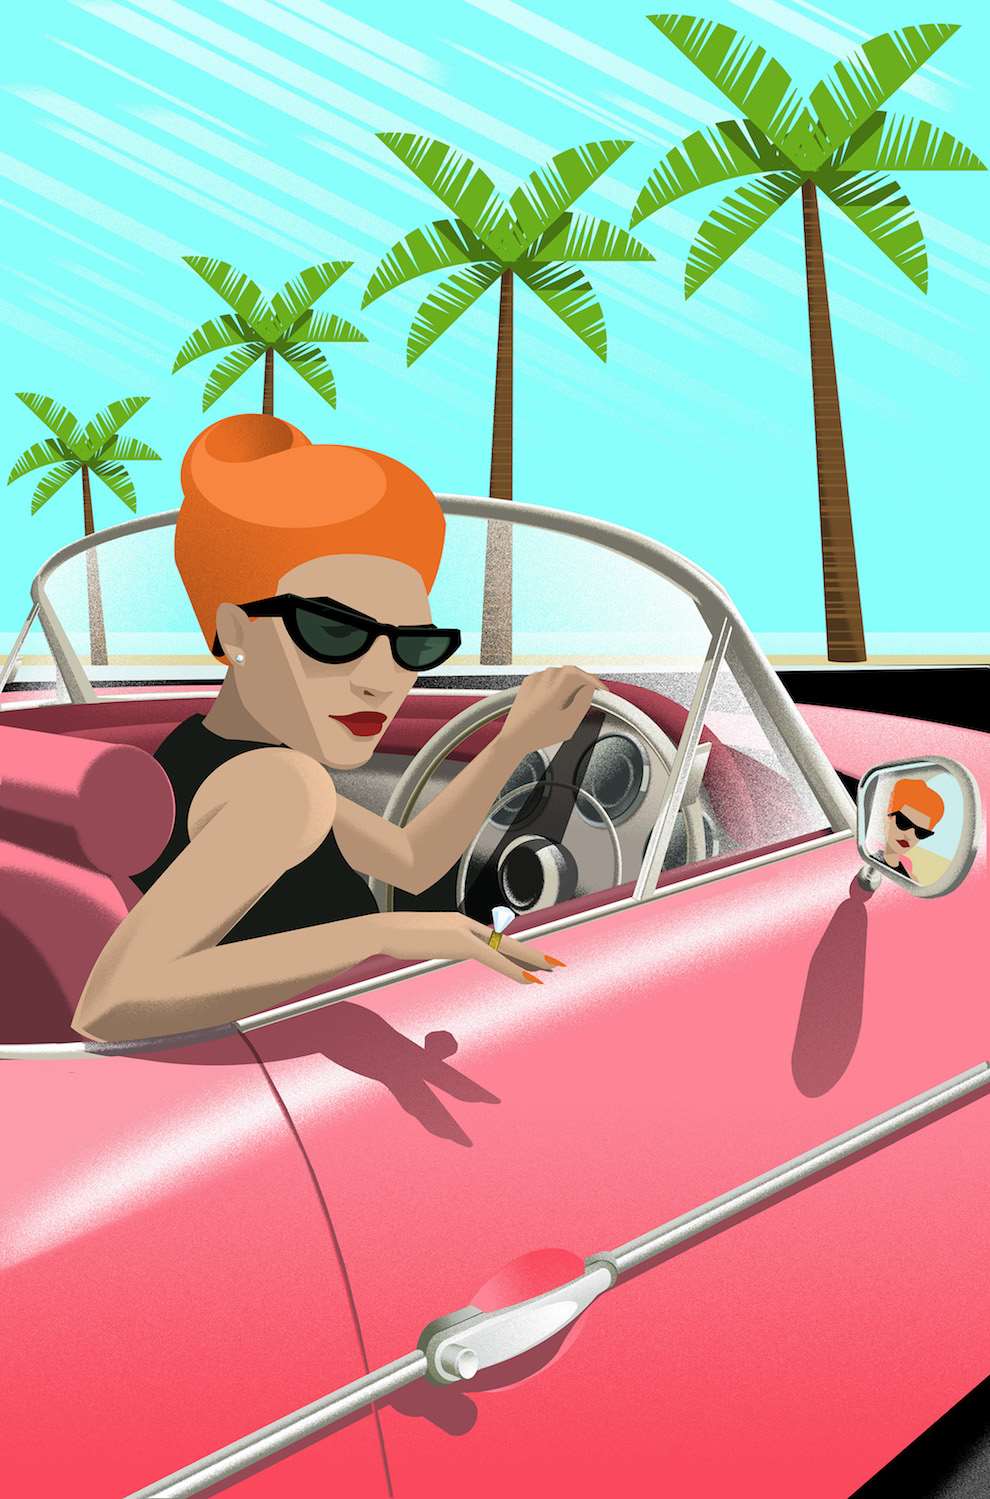 Max Ellis, Bold and graphic digital illustration of a woman driving a convertible car in California 